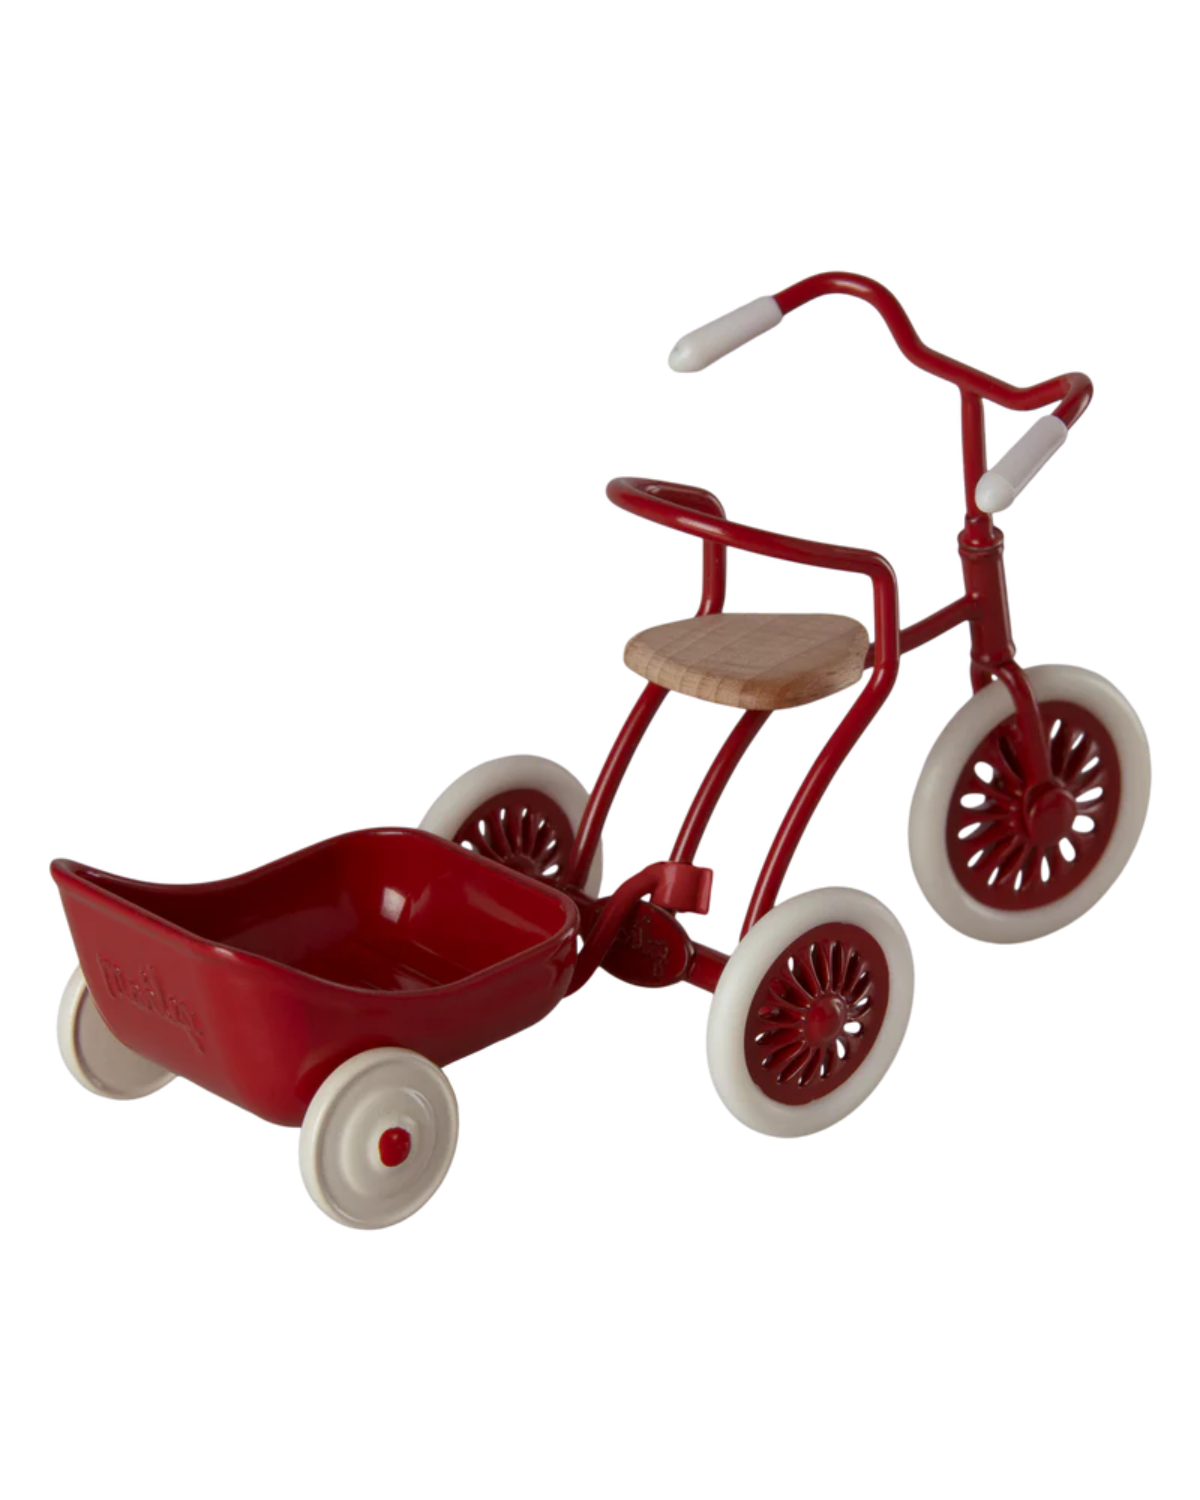 Maileg Mouse Red Tricycle Hanger: Dollhouse Accessory